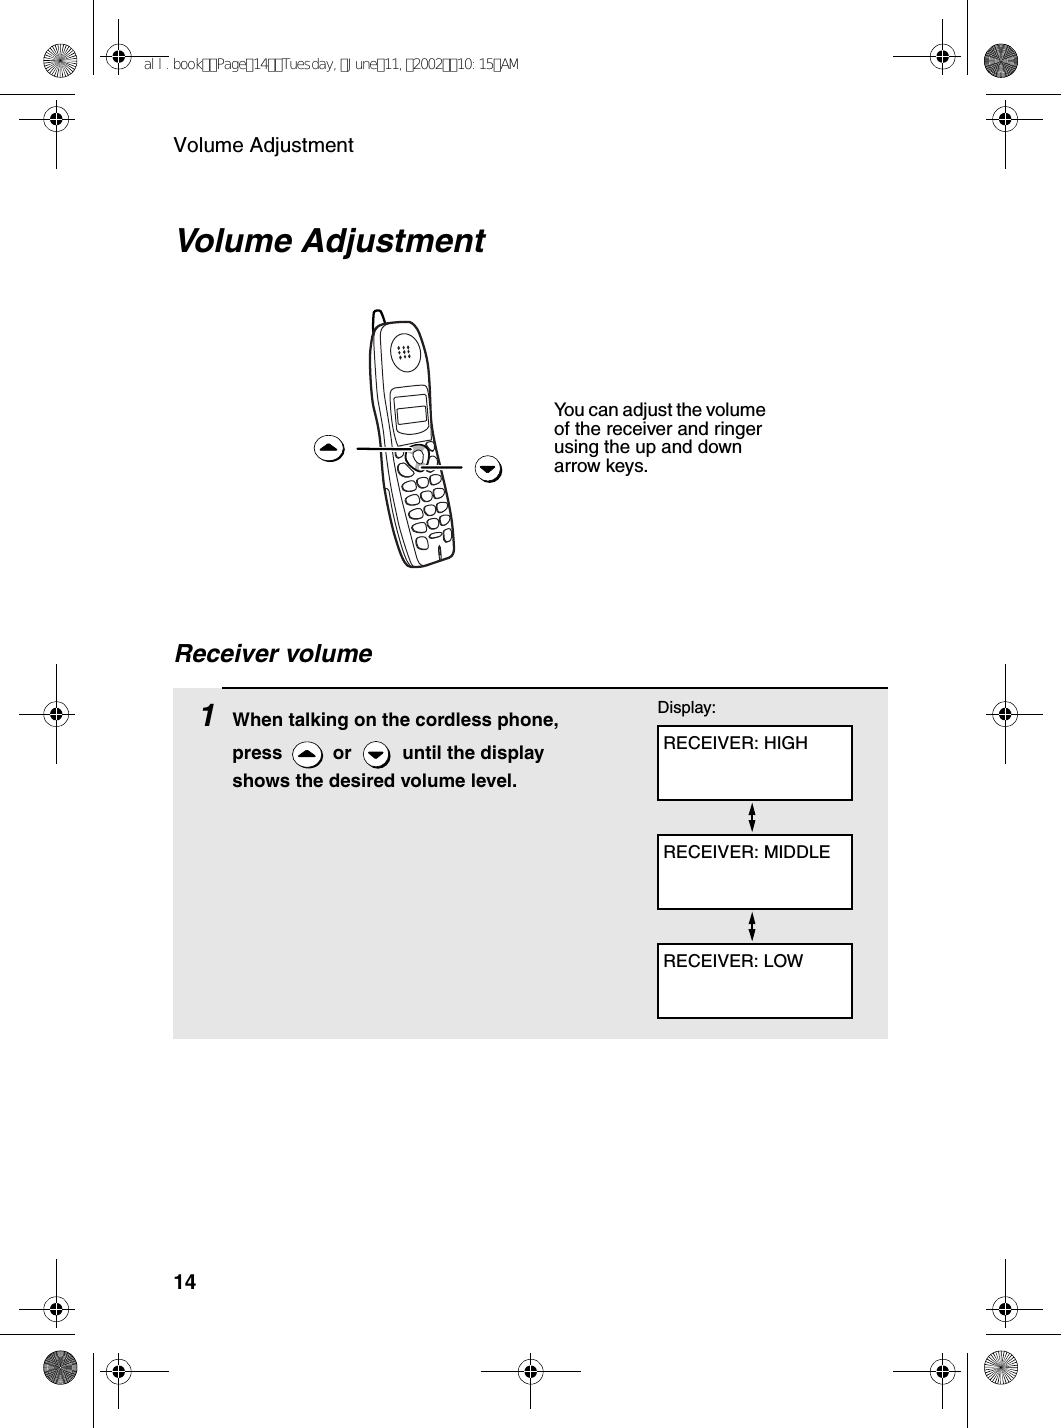 Volume Adjustment14Volume Adjustment You can adjust the volume of the receiver and ringer using the up and down arrow keys.1When talking on the cordless phone, press   or   until the display shows the desired volume level.RECEIVER: HIGHDisplay:RECEIVER: MIDDLERECEIVER: LOWReceiver volumeall.bookPage14Tuesday,June11,200210:15AM